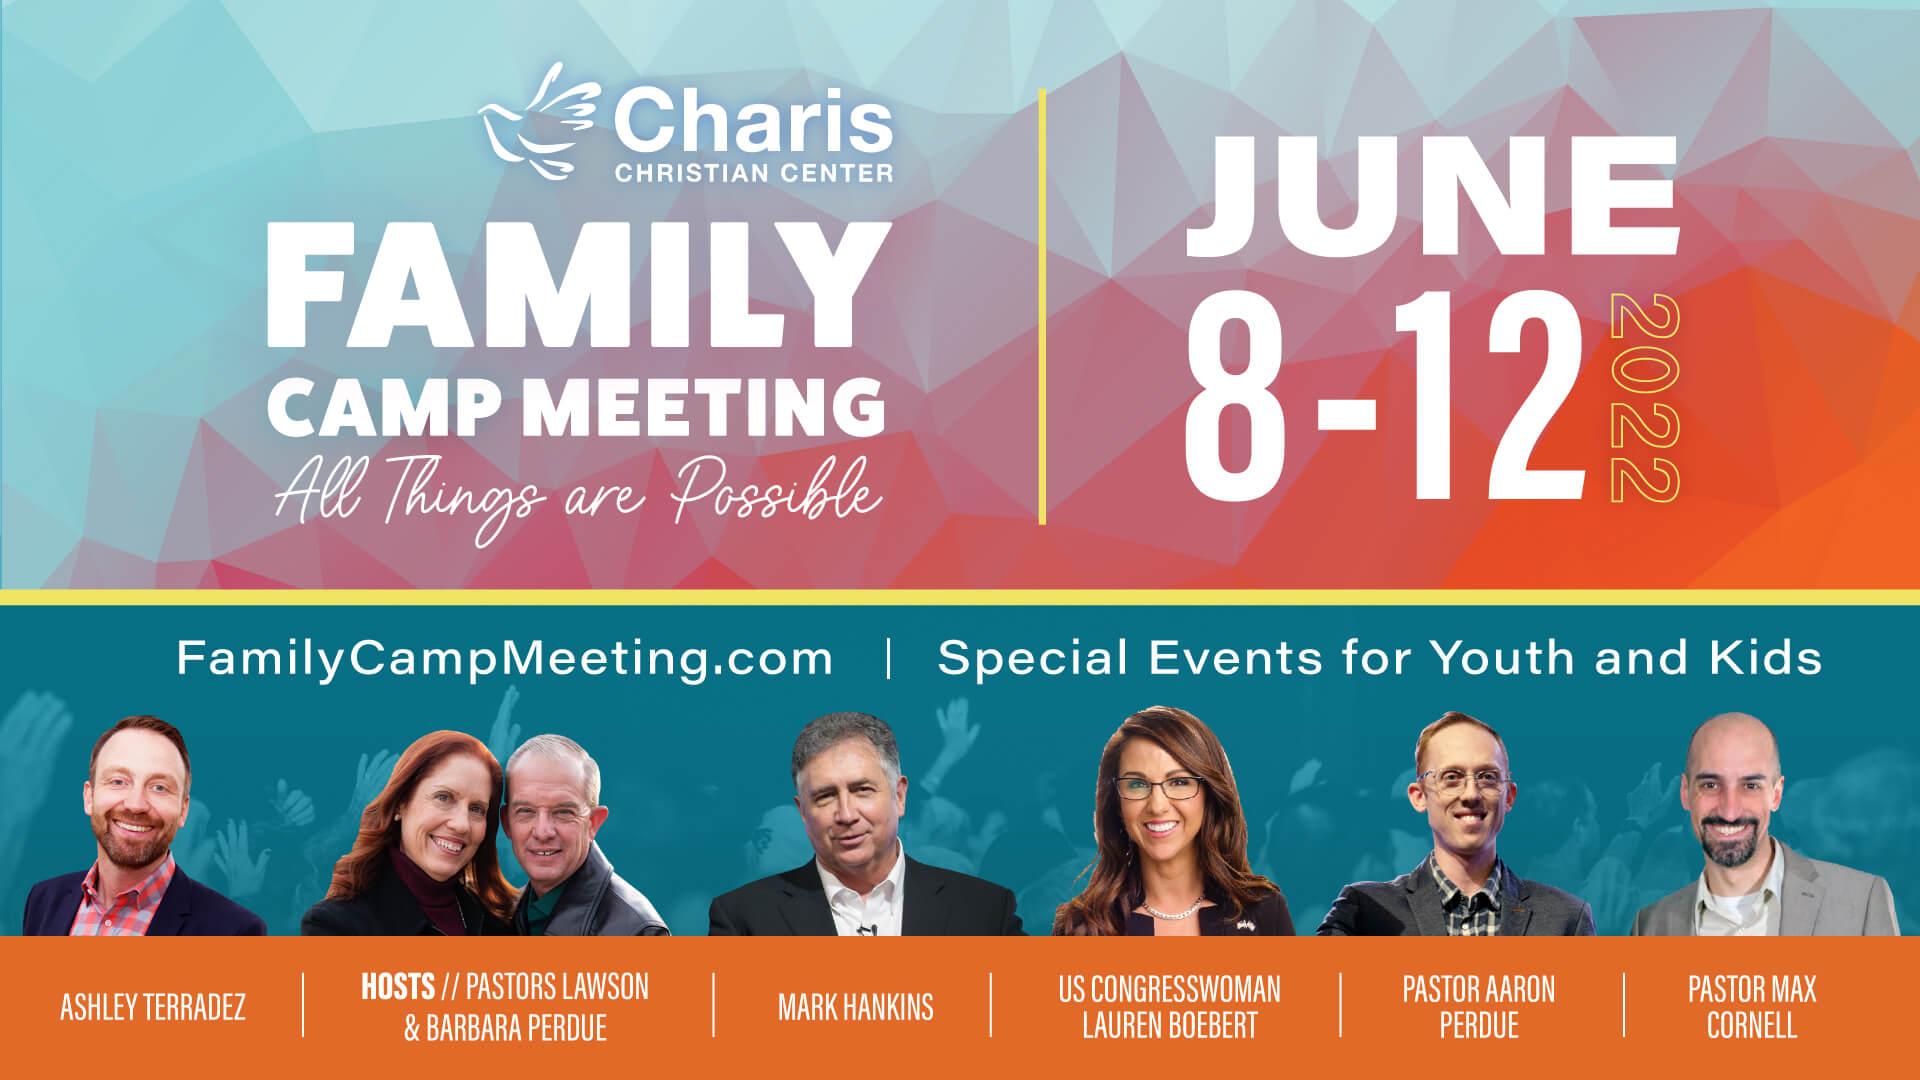 Family Camp Meeting at Charis Christian Center on June 8-12, 2022